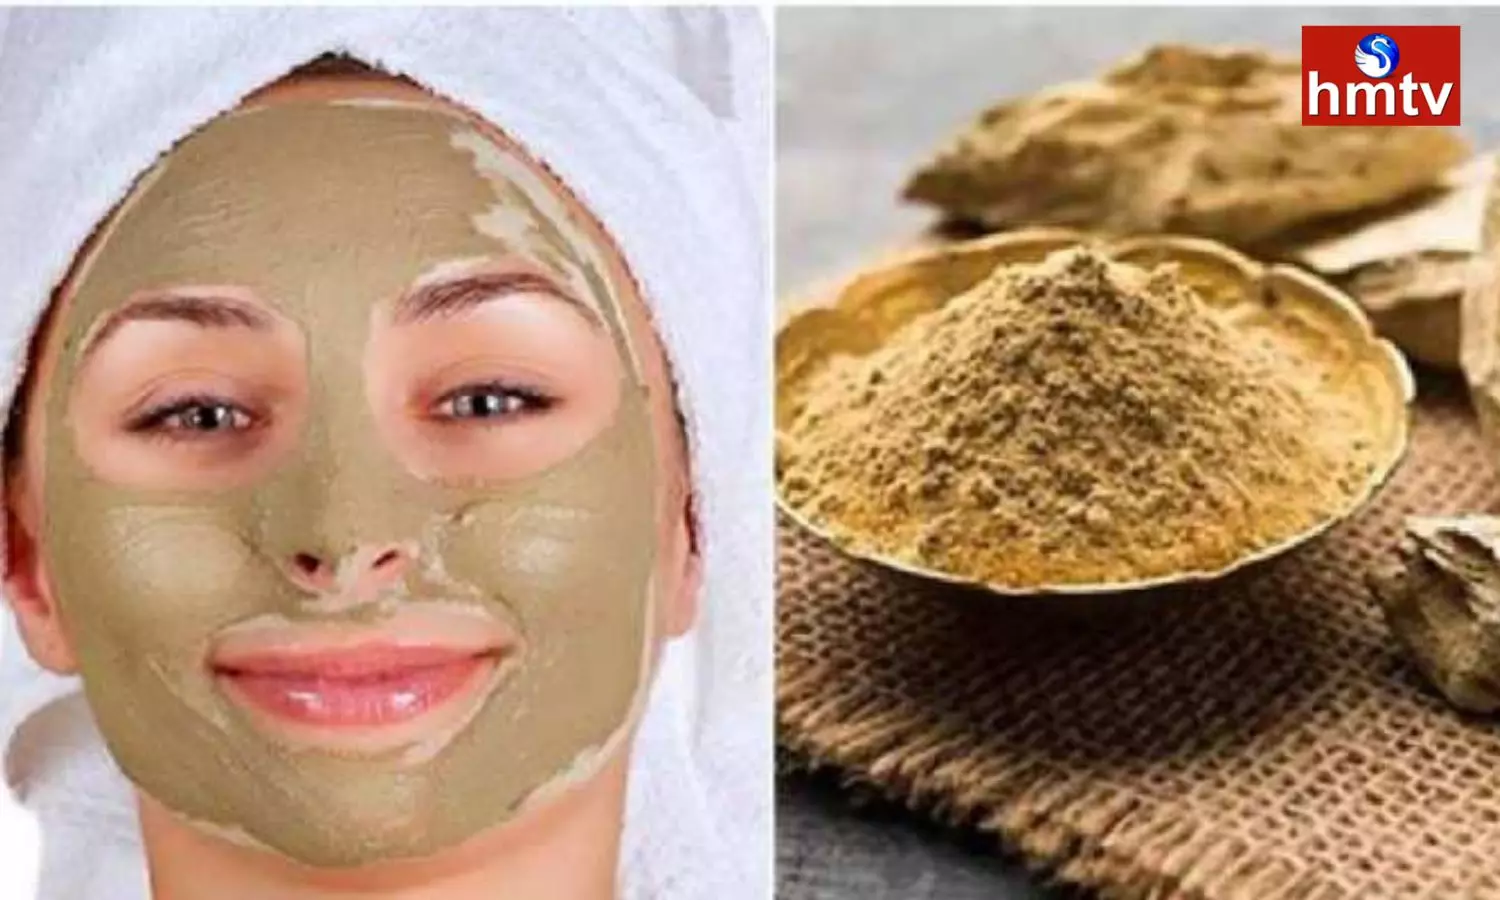 If you Apply Aloevera Gel Mixed With Multani Mitti you Will Have a Beautiful Face